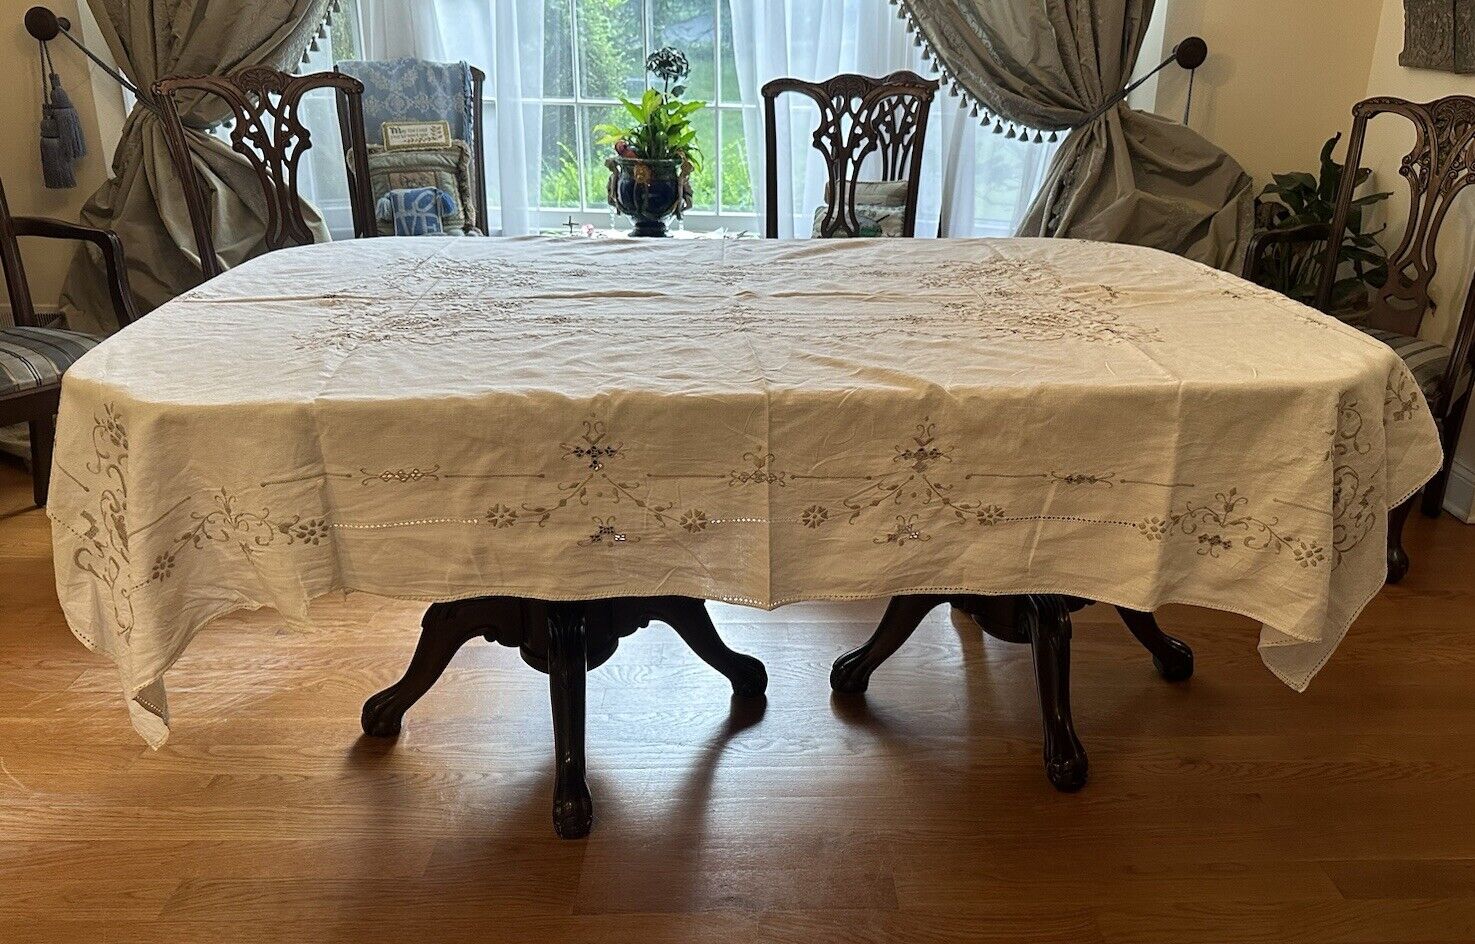 VINTAGE LACE PUNTO ANTICO ITALY EMBROIDERED LINEN TABLECLOTH FLOWING URNS 82”